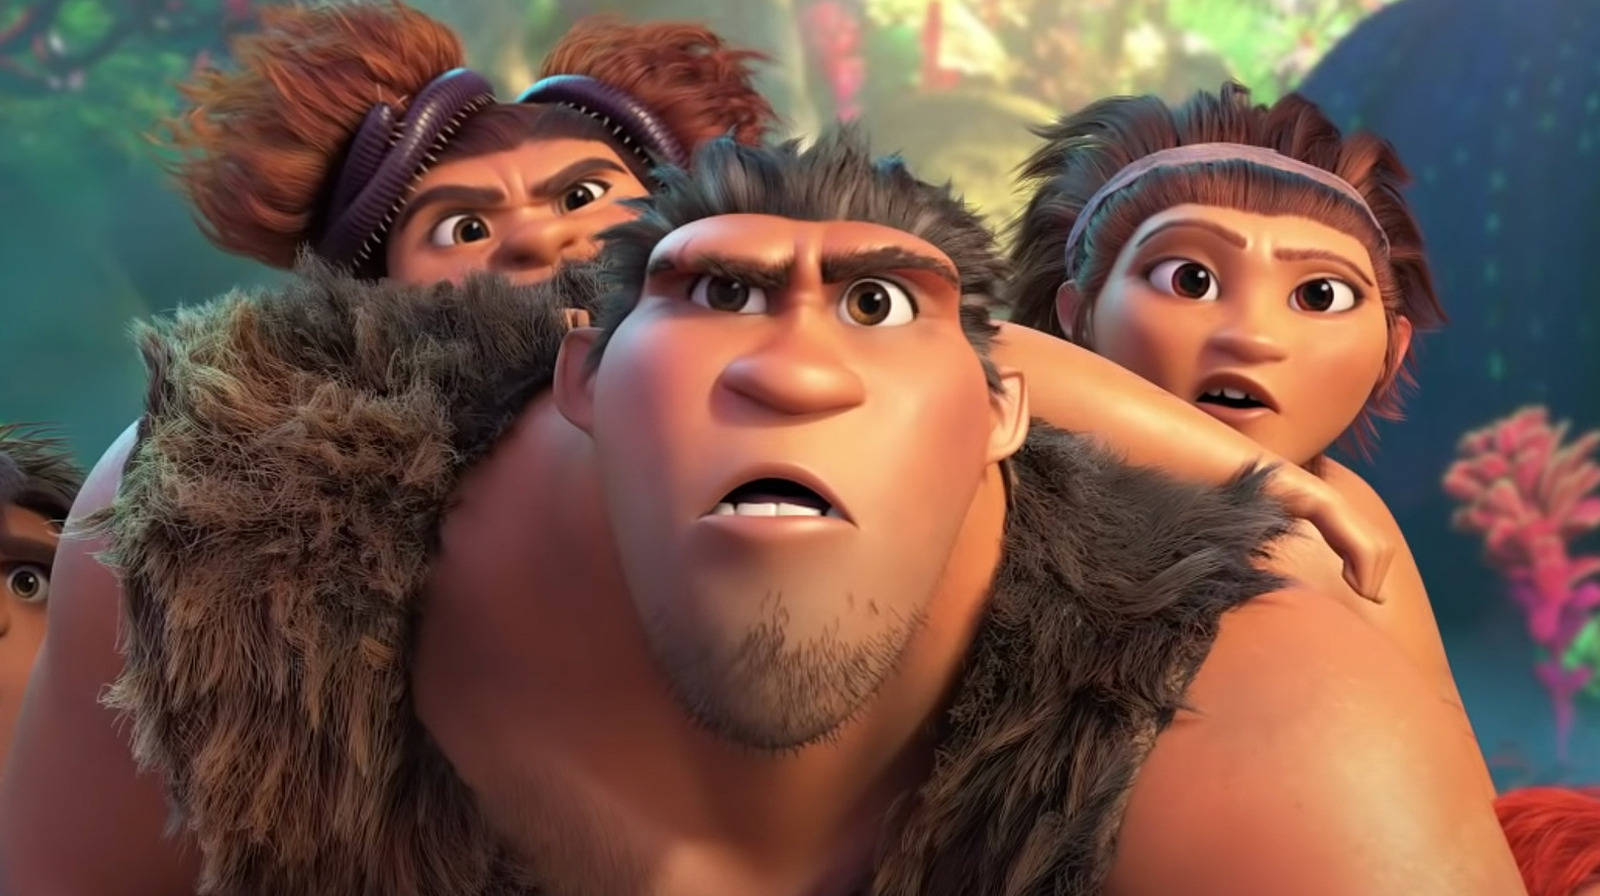 The Croods Characters Confused Faces Wallpaper